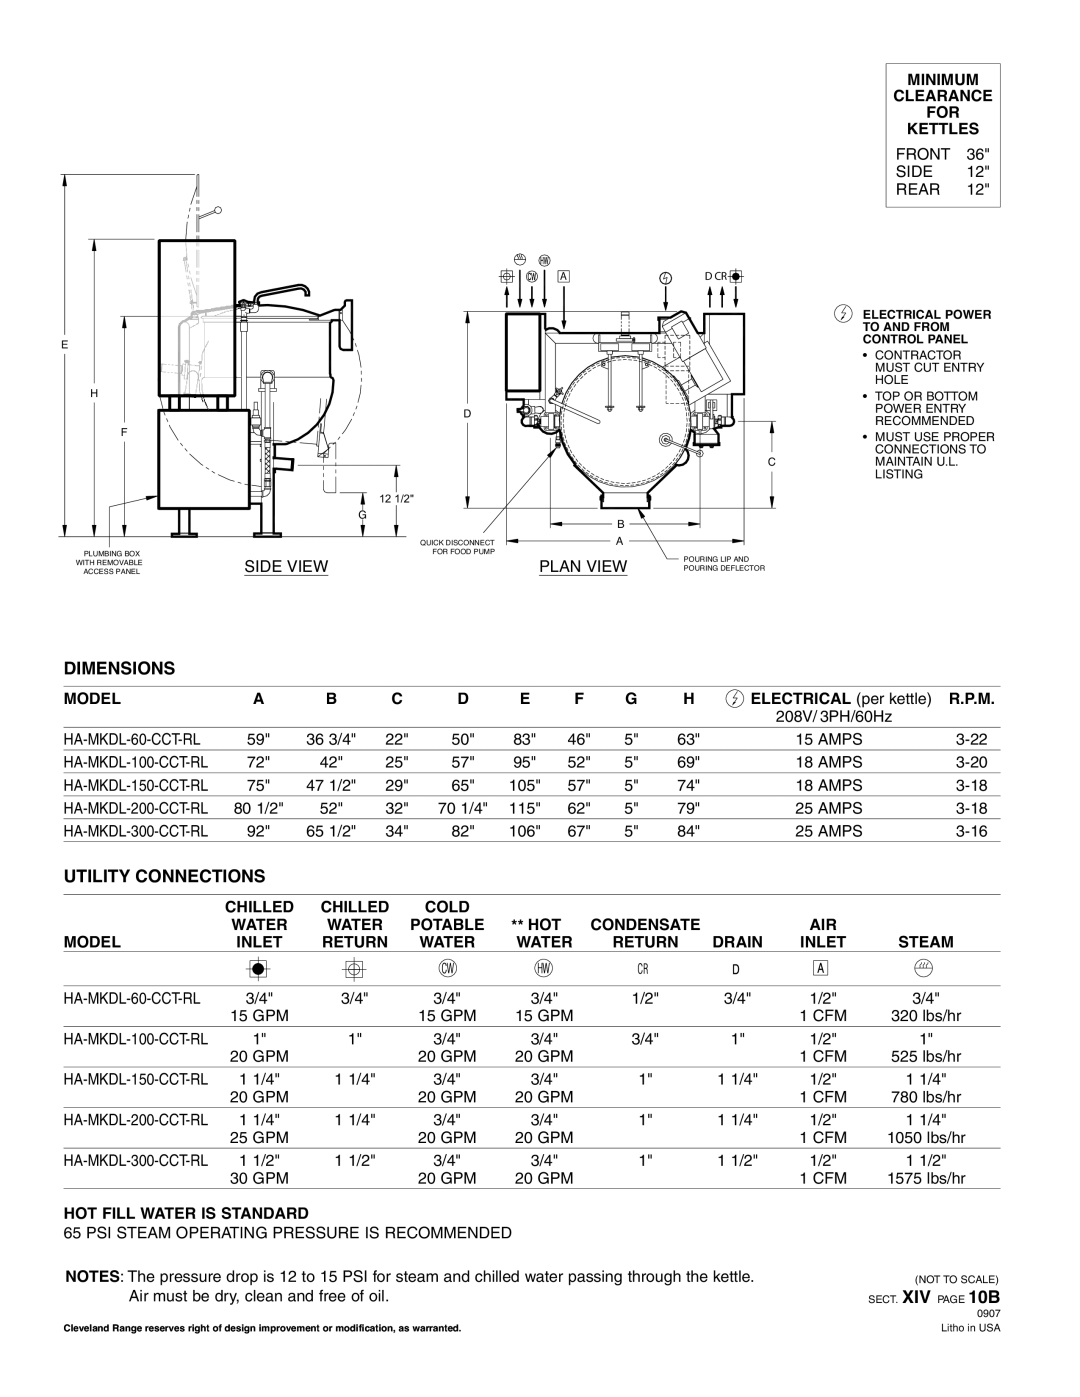 Cleveland Range HA-MKDL-300-CCT-RL Dimensions, Utility Connections, Electrical Power, To And From, Control Panel 